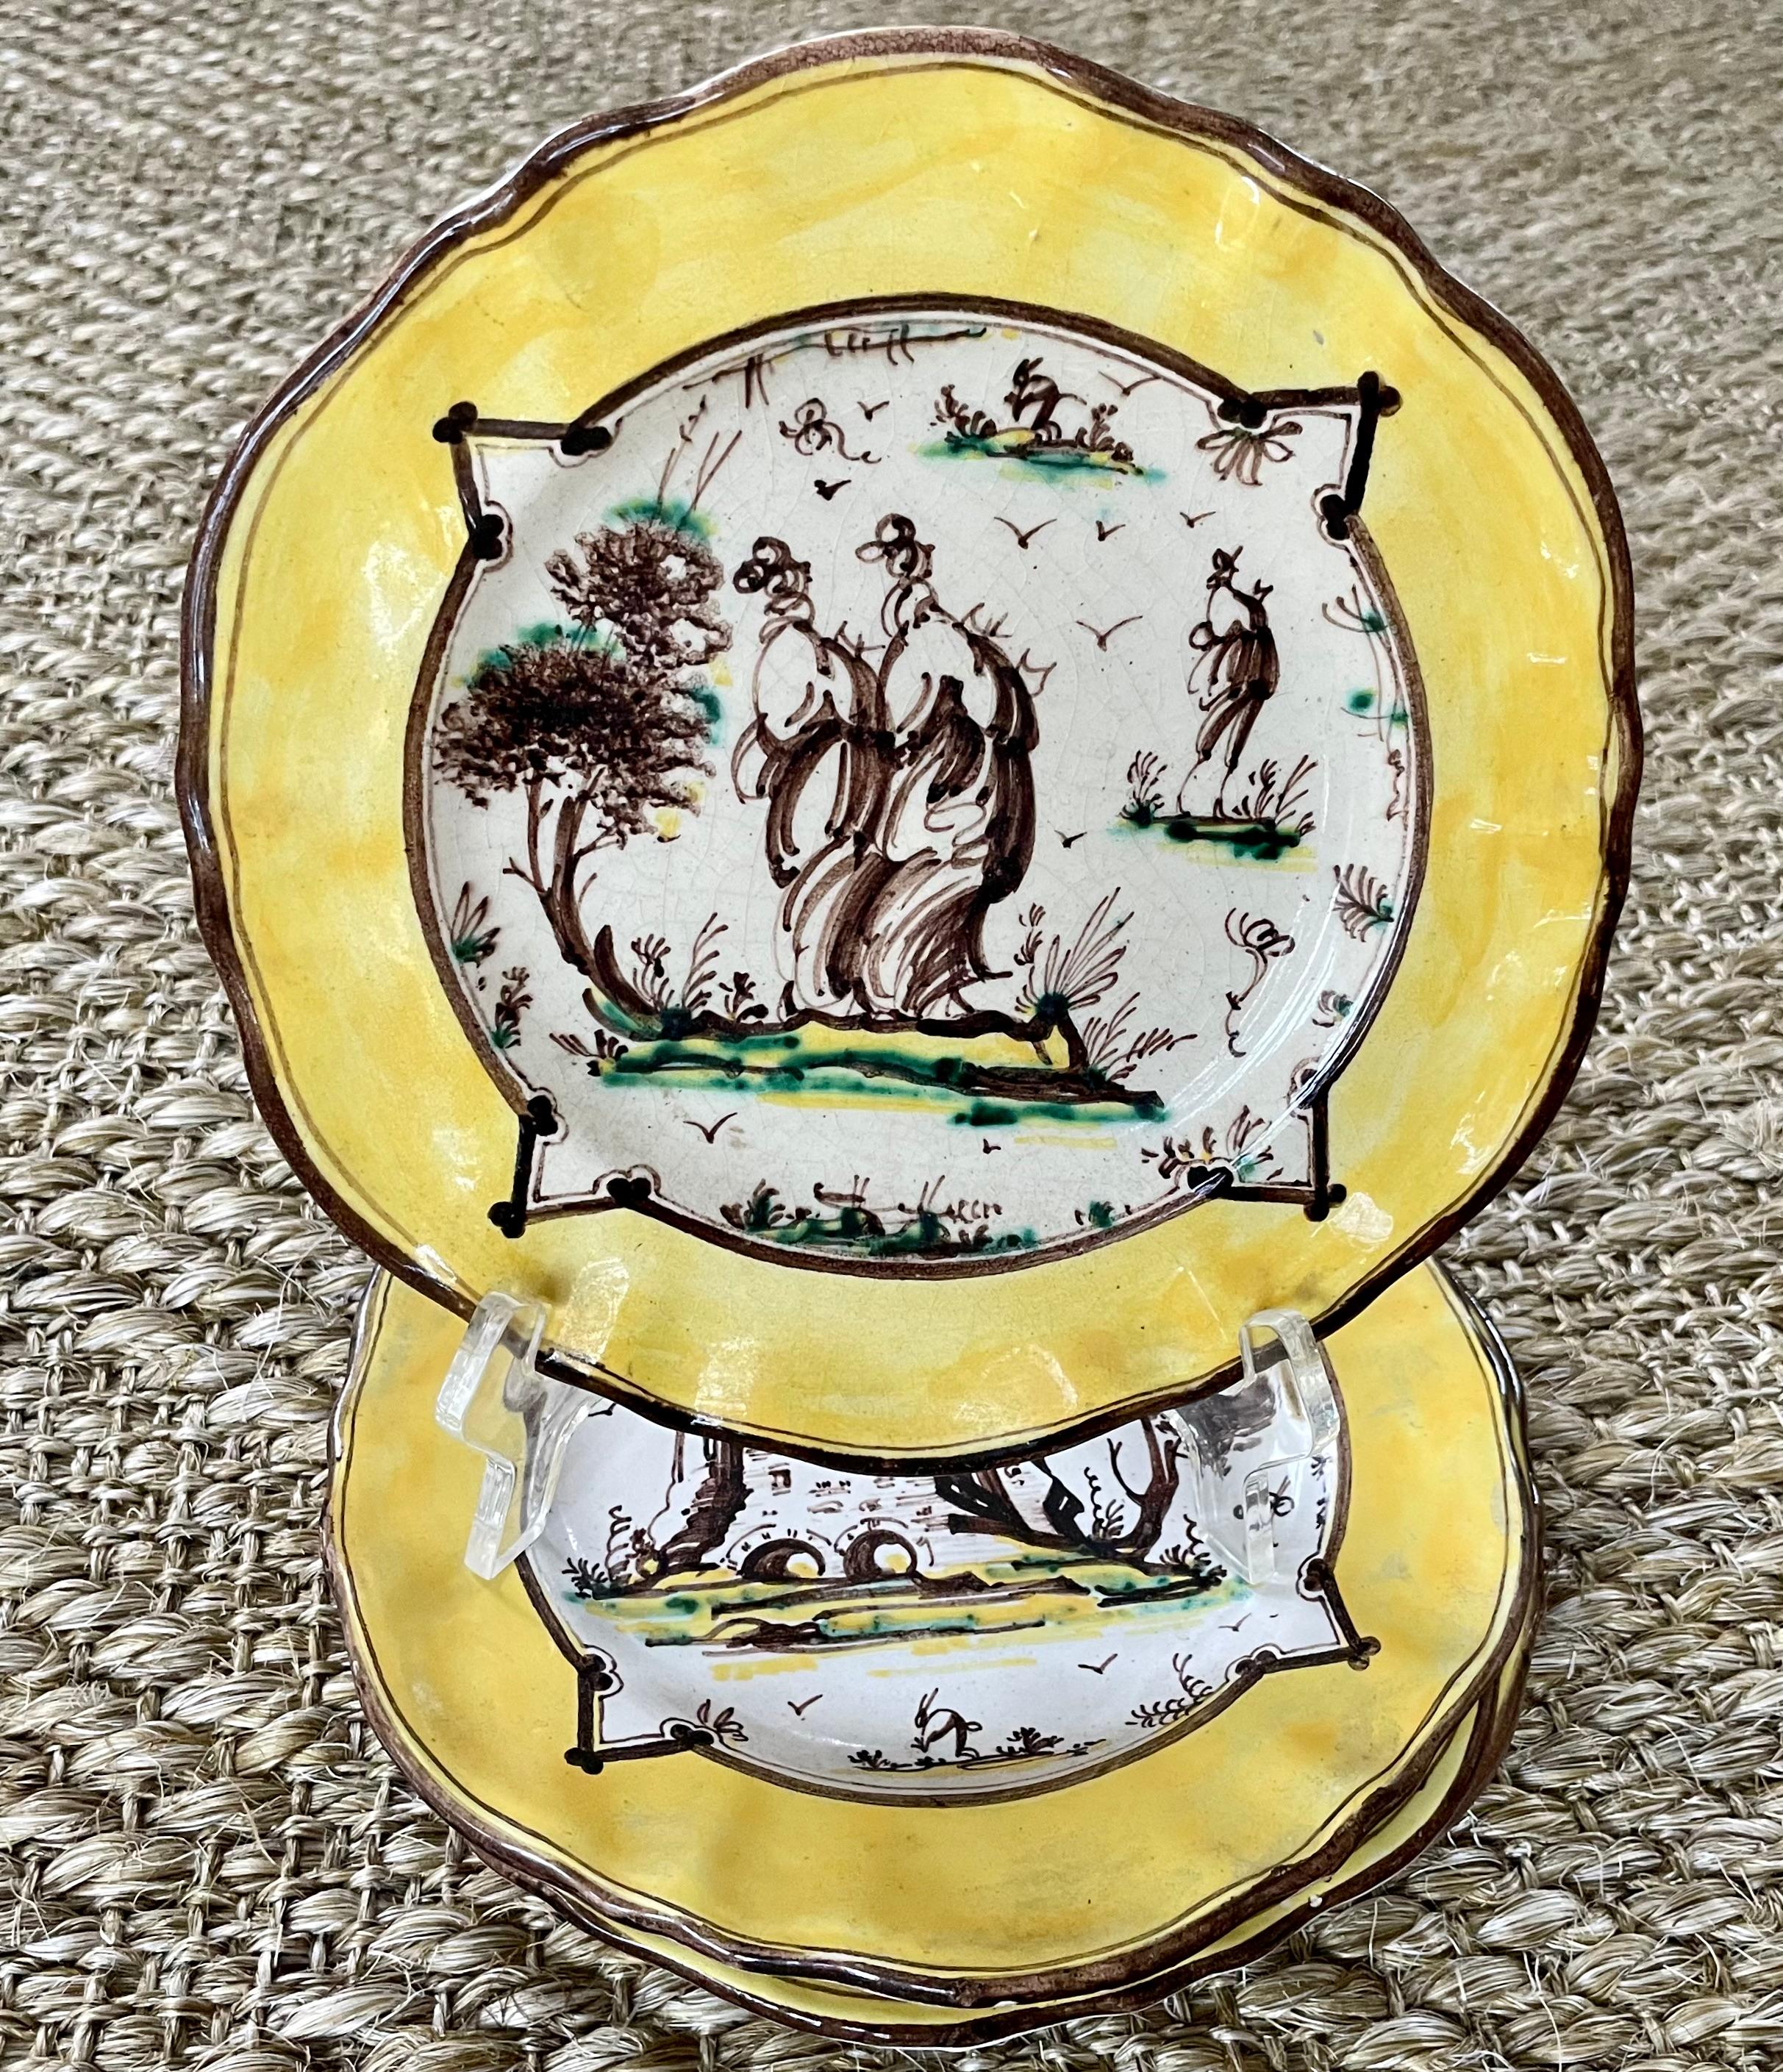 Set of Yellow Albisola Plates. Set of four charming Italian plates in characteristic yellow, green and brown with provincial castles, landscapes, figures and birds. With markings for Albisola. Italy early 19th century.

Dimensions: 8.25